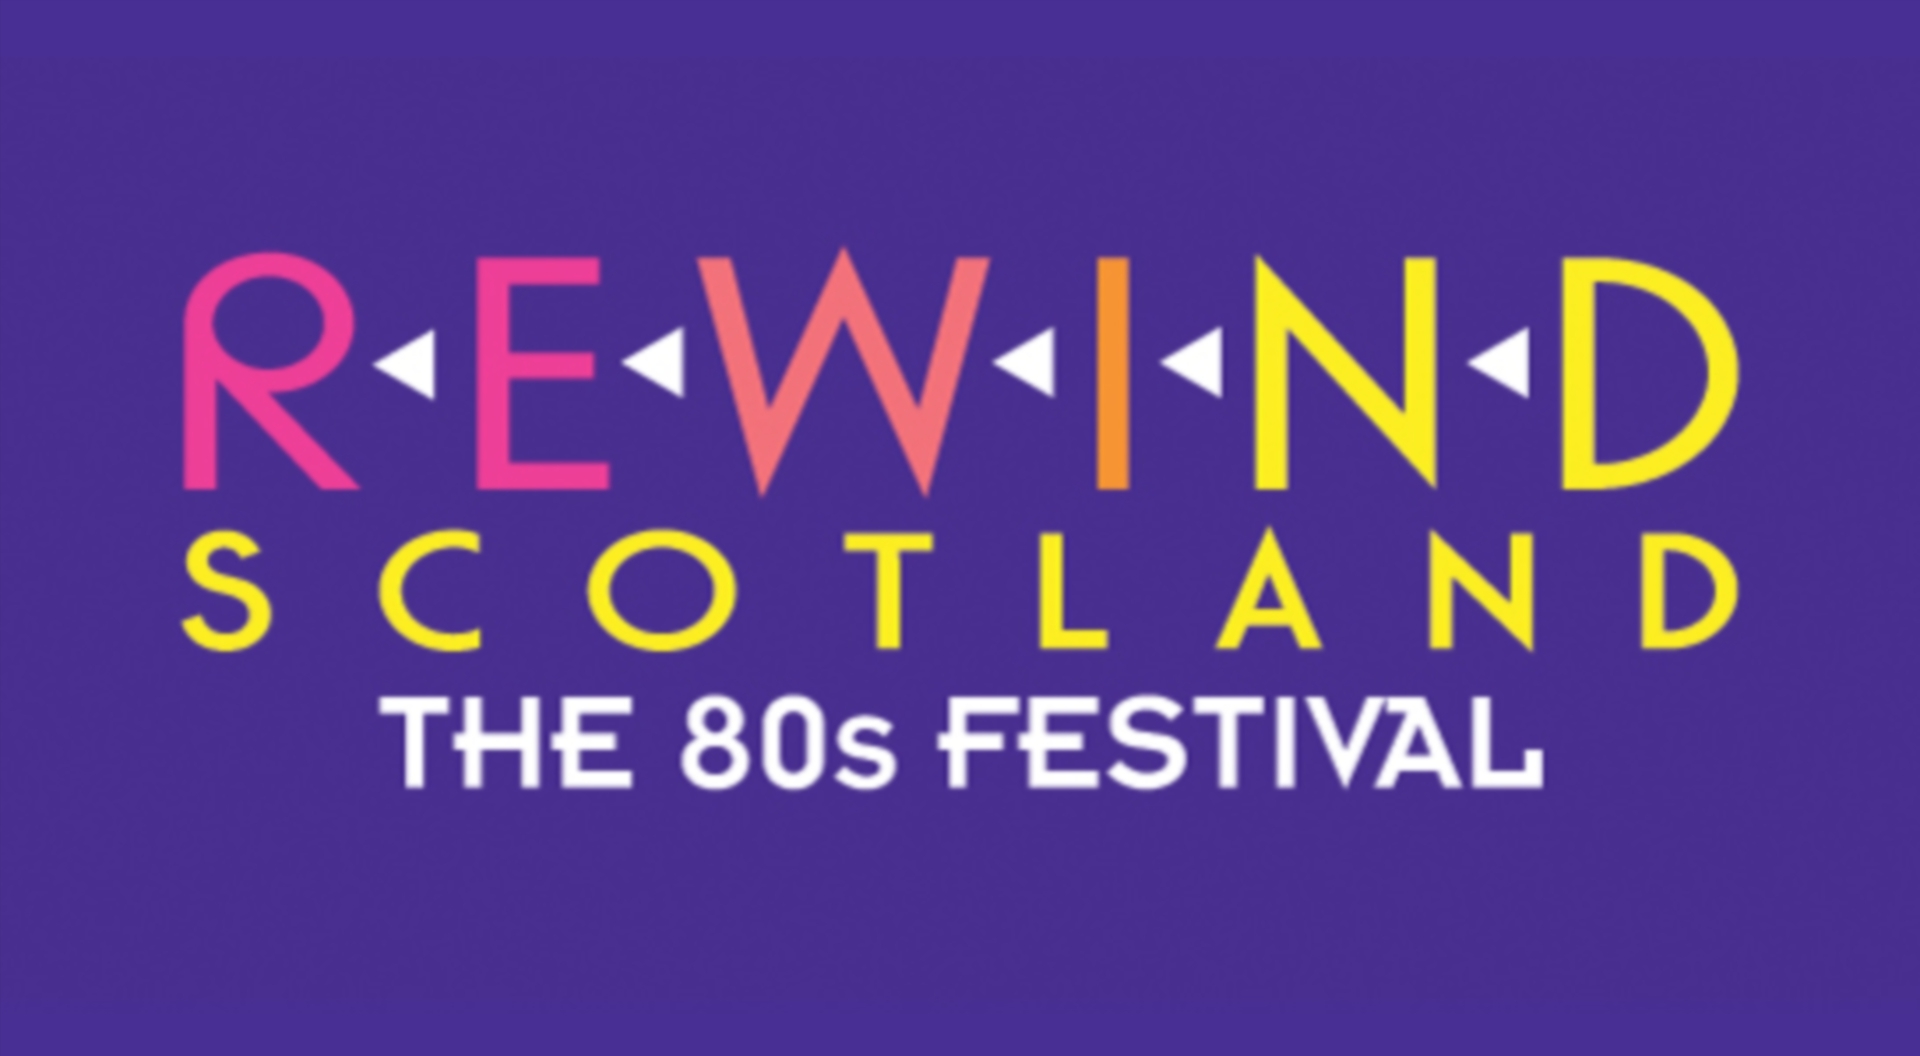 Rewind Scotland is back at Scone Palace in July.